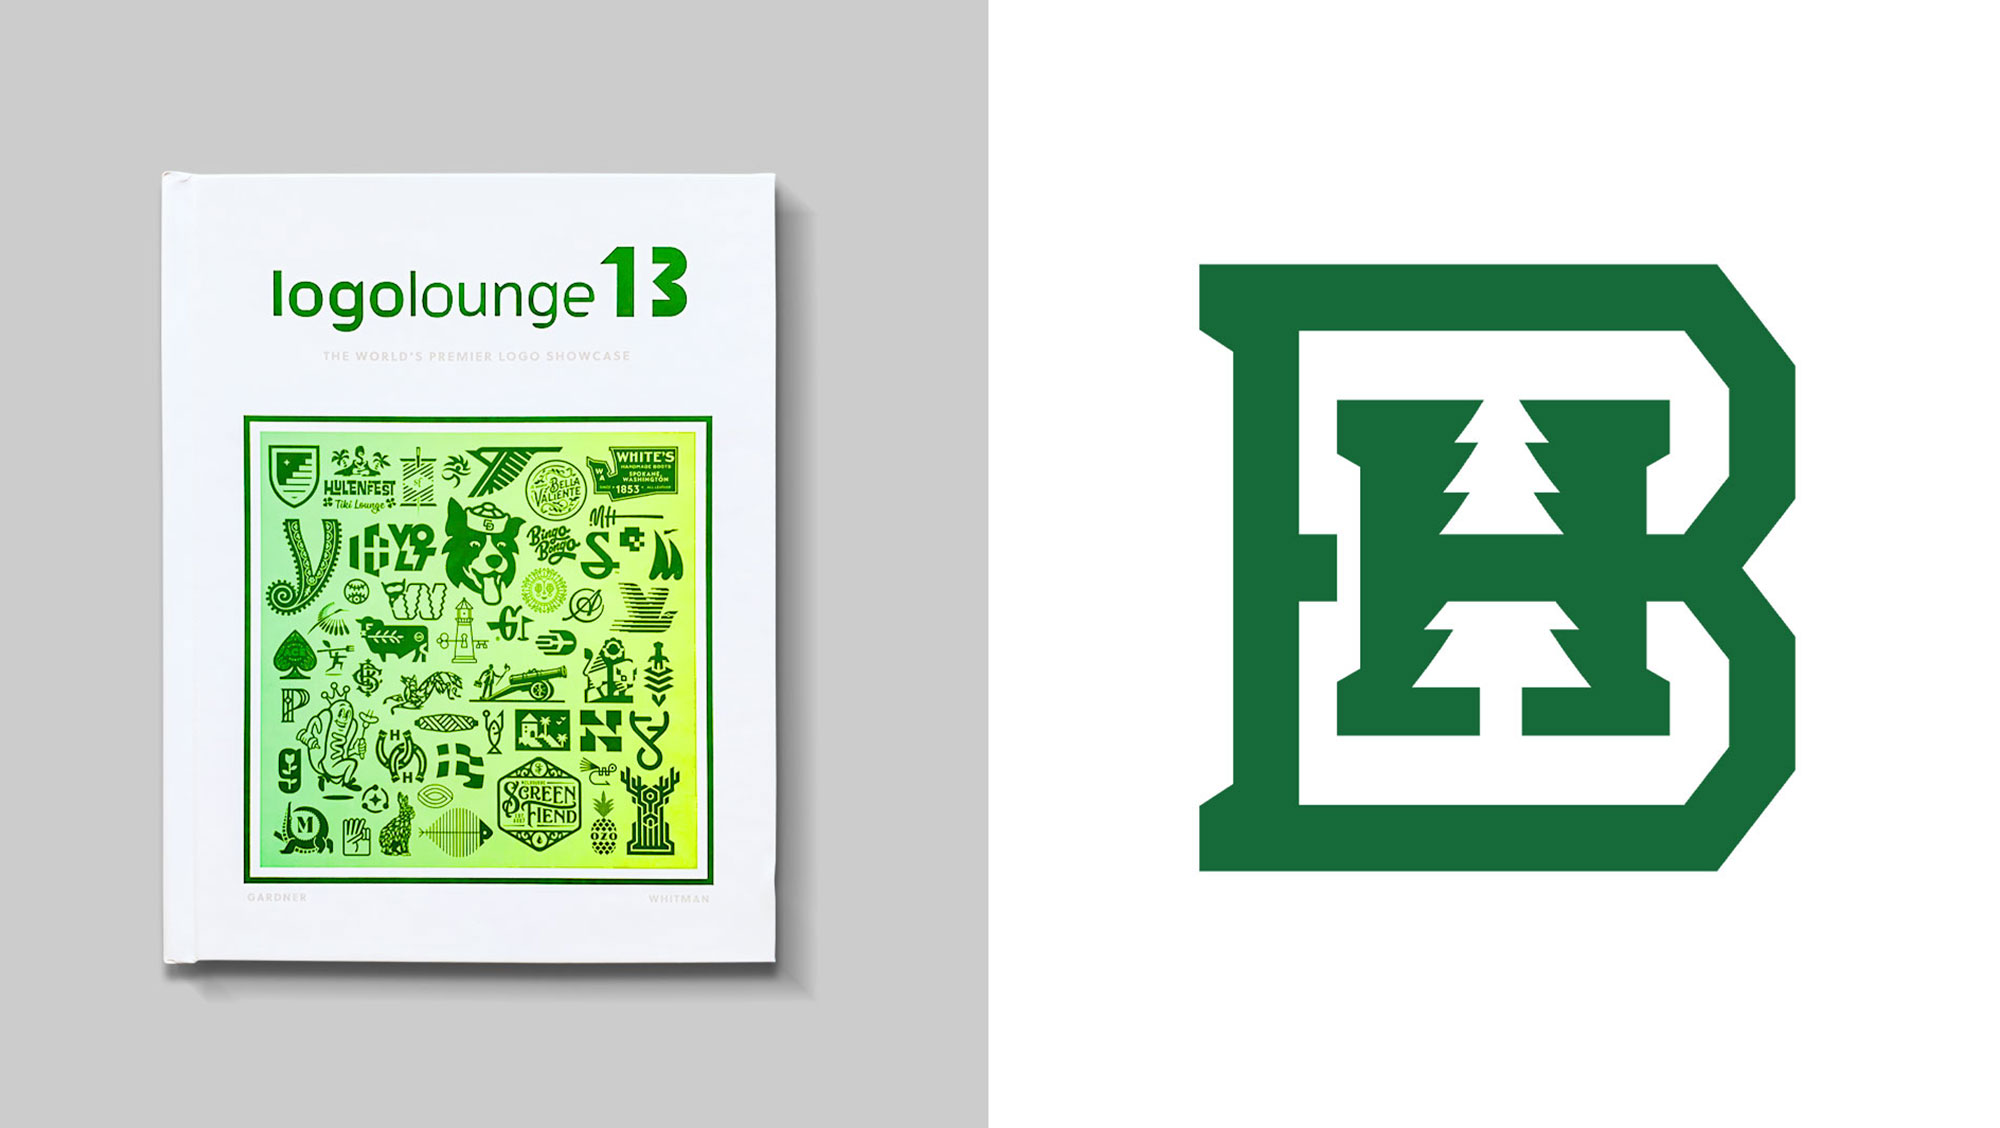 The logo appears in LogoLounge Book 13, a bestselling series featuring the latest and greatest in identity design from accomplished designers around the world. 